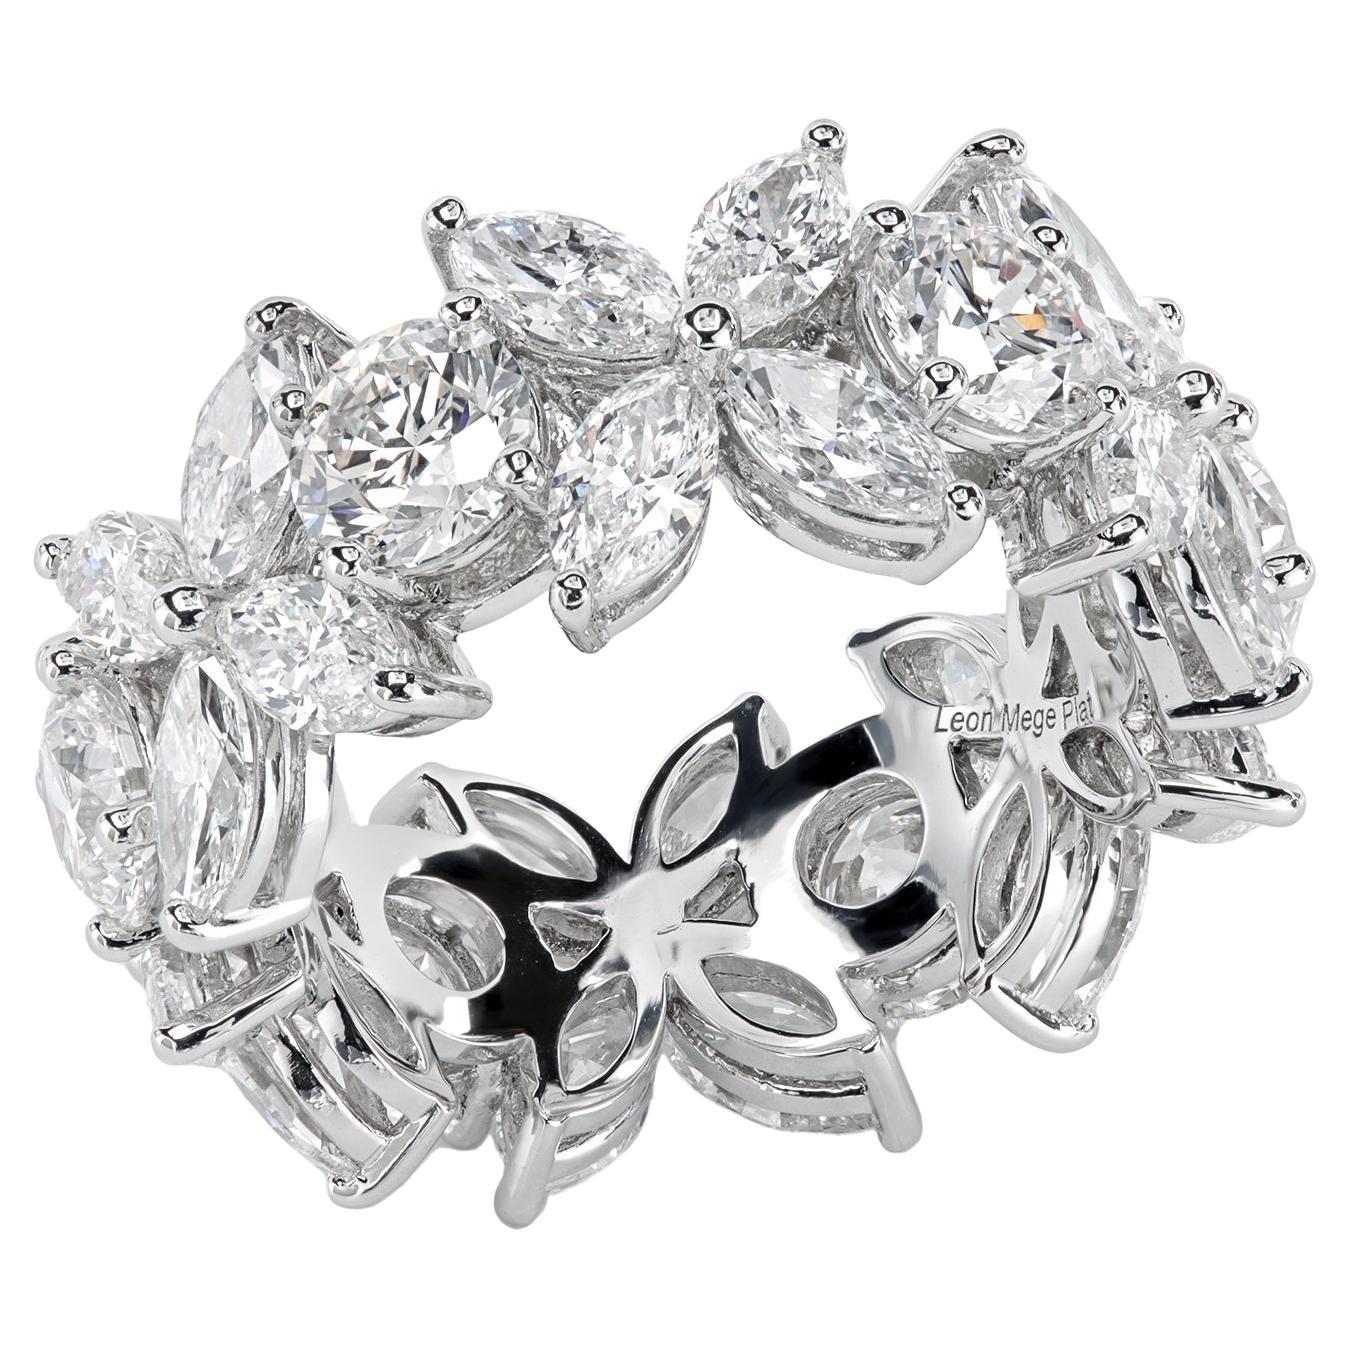 Leon Megé eternity band of round diamonds alternating with marquise clusters  For Sale